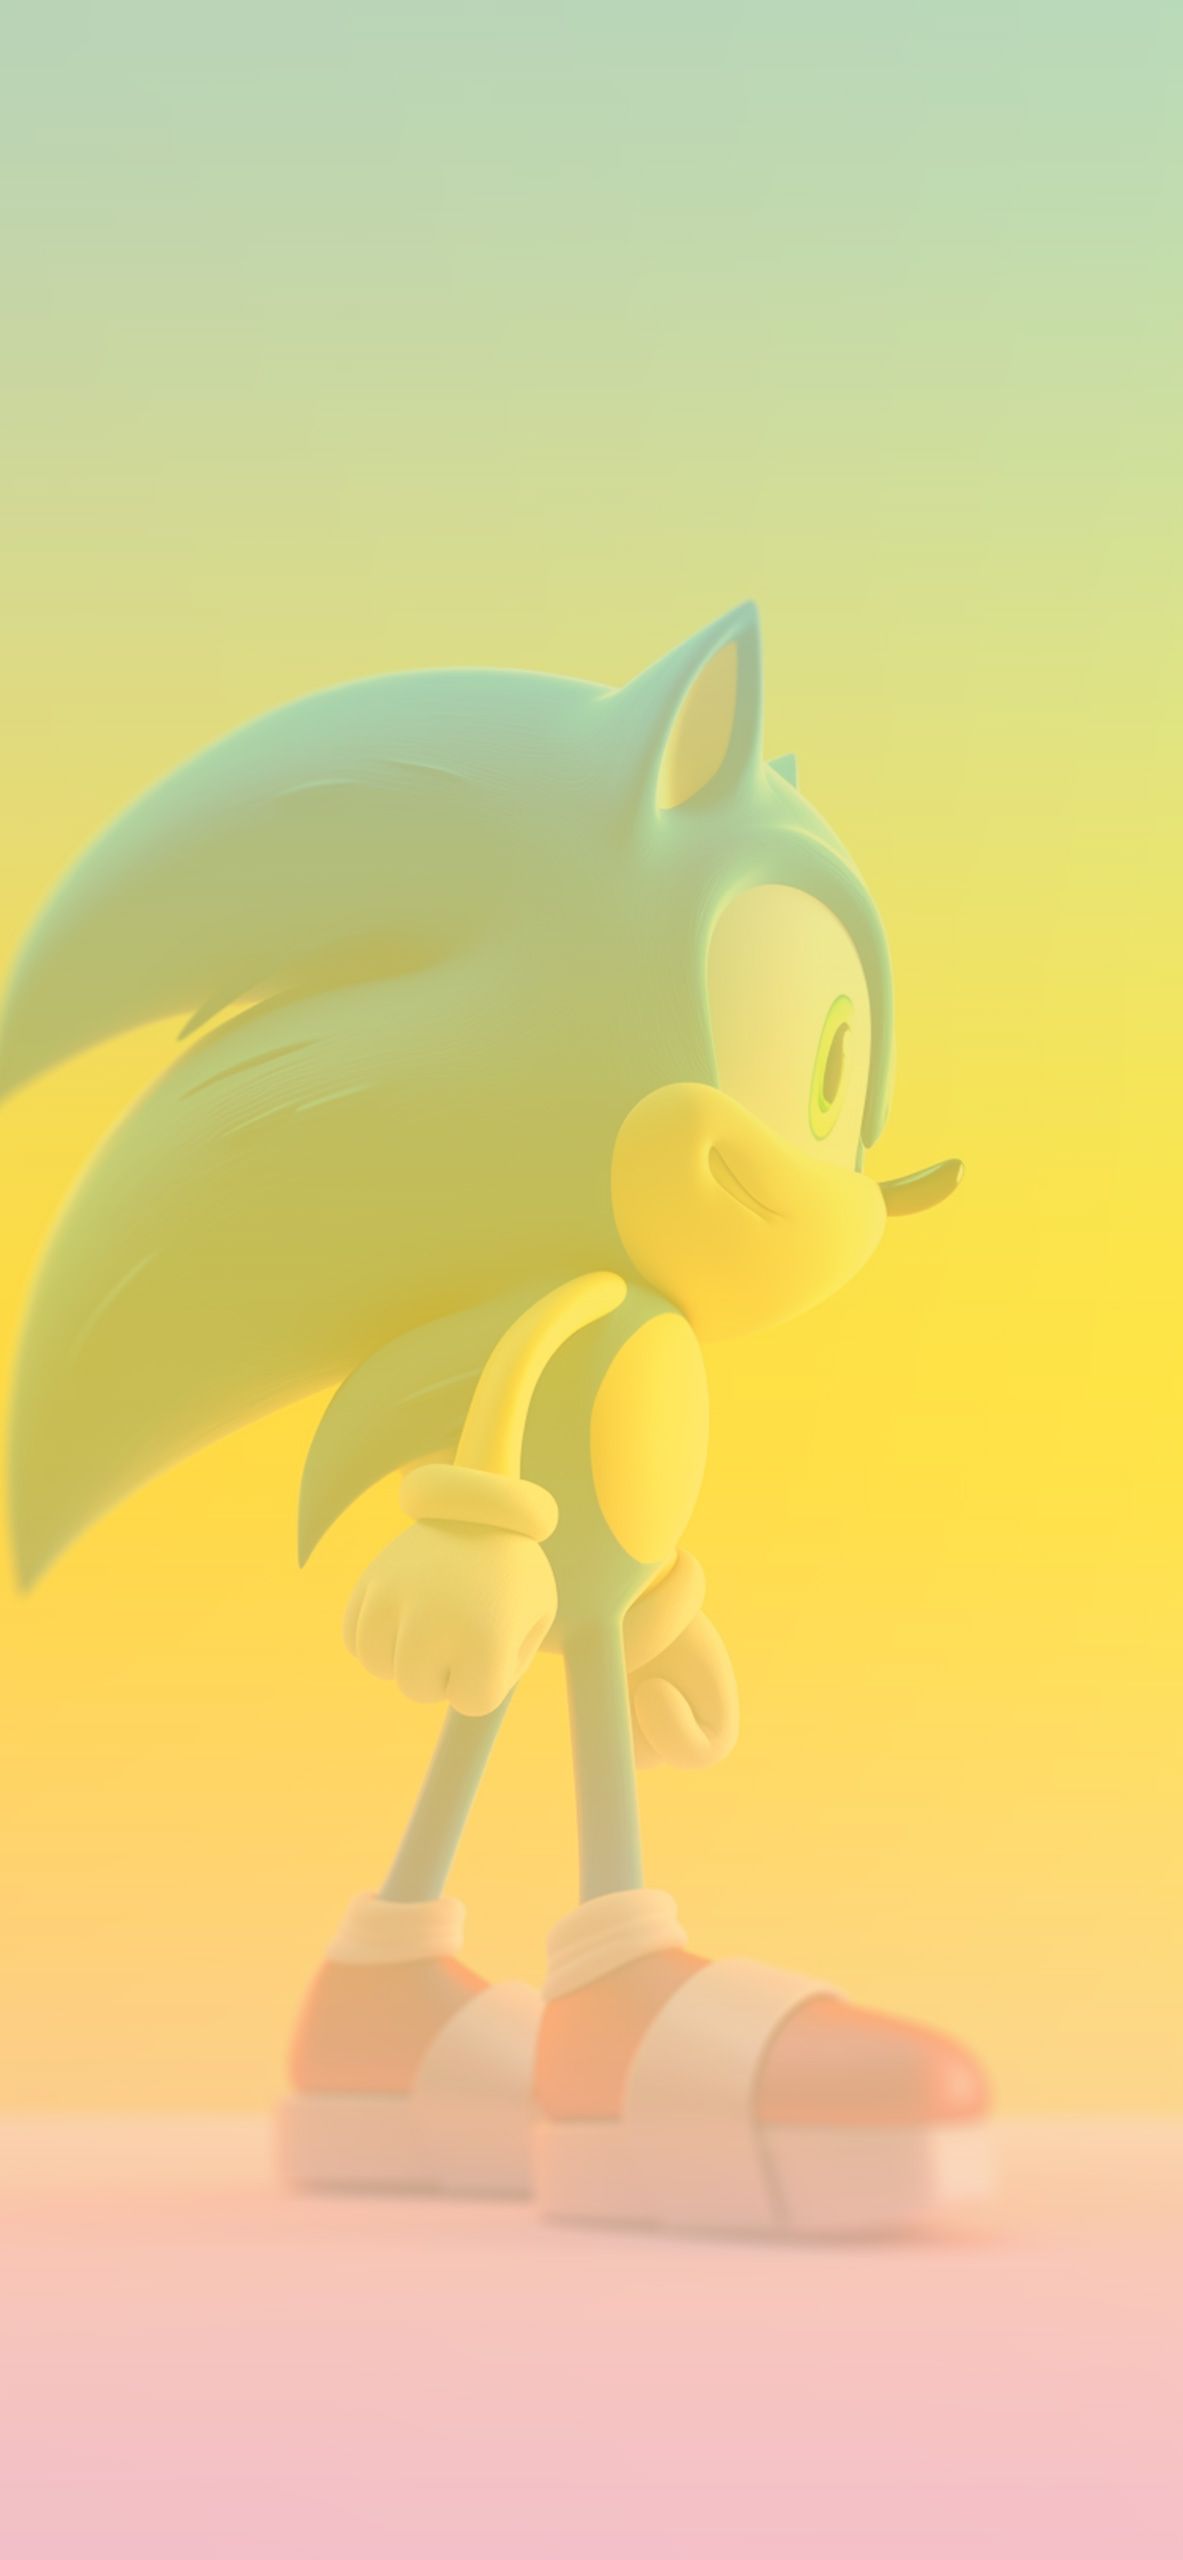 Iphone wallpaper of the hedgehog from the Sonic the Hedgehog - Sonic